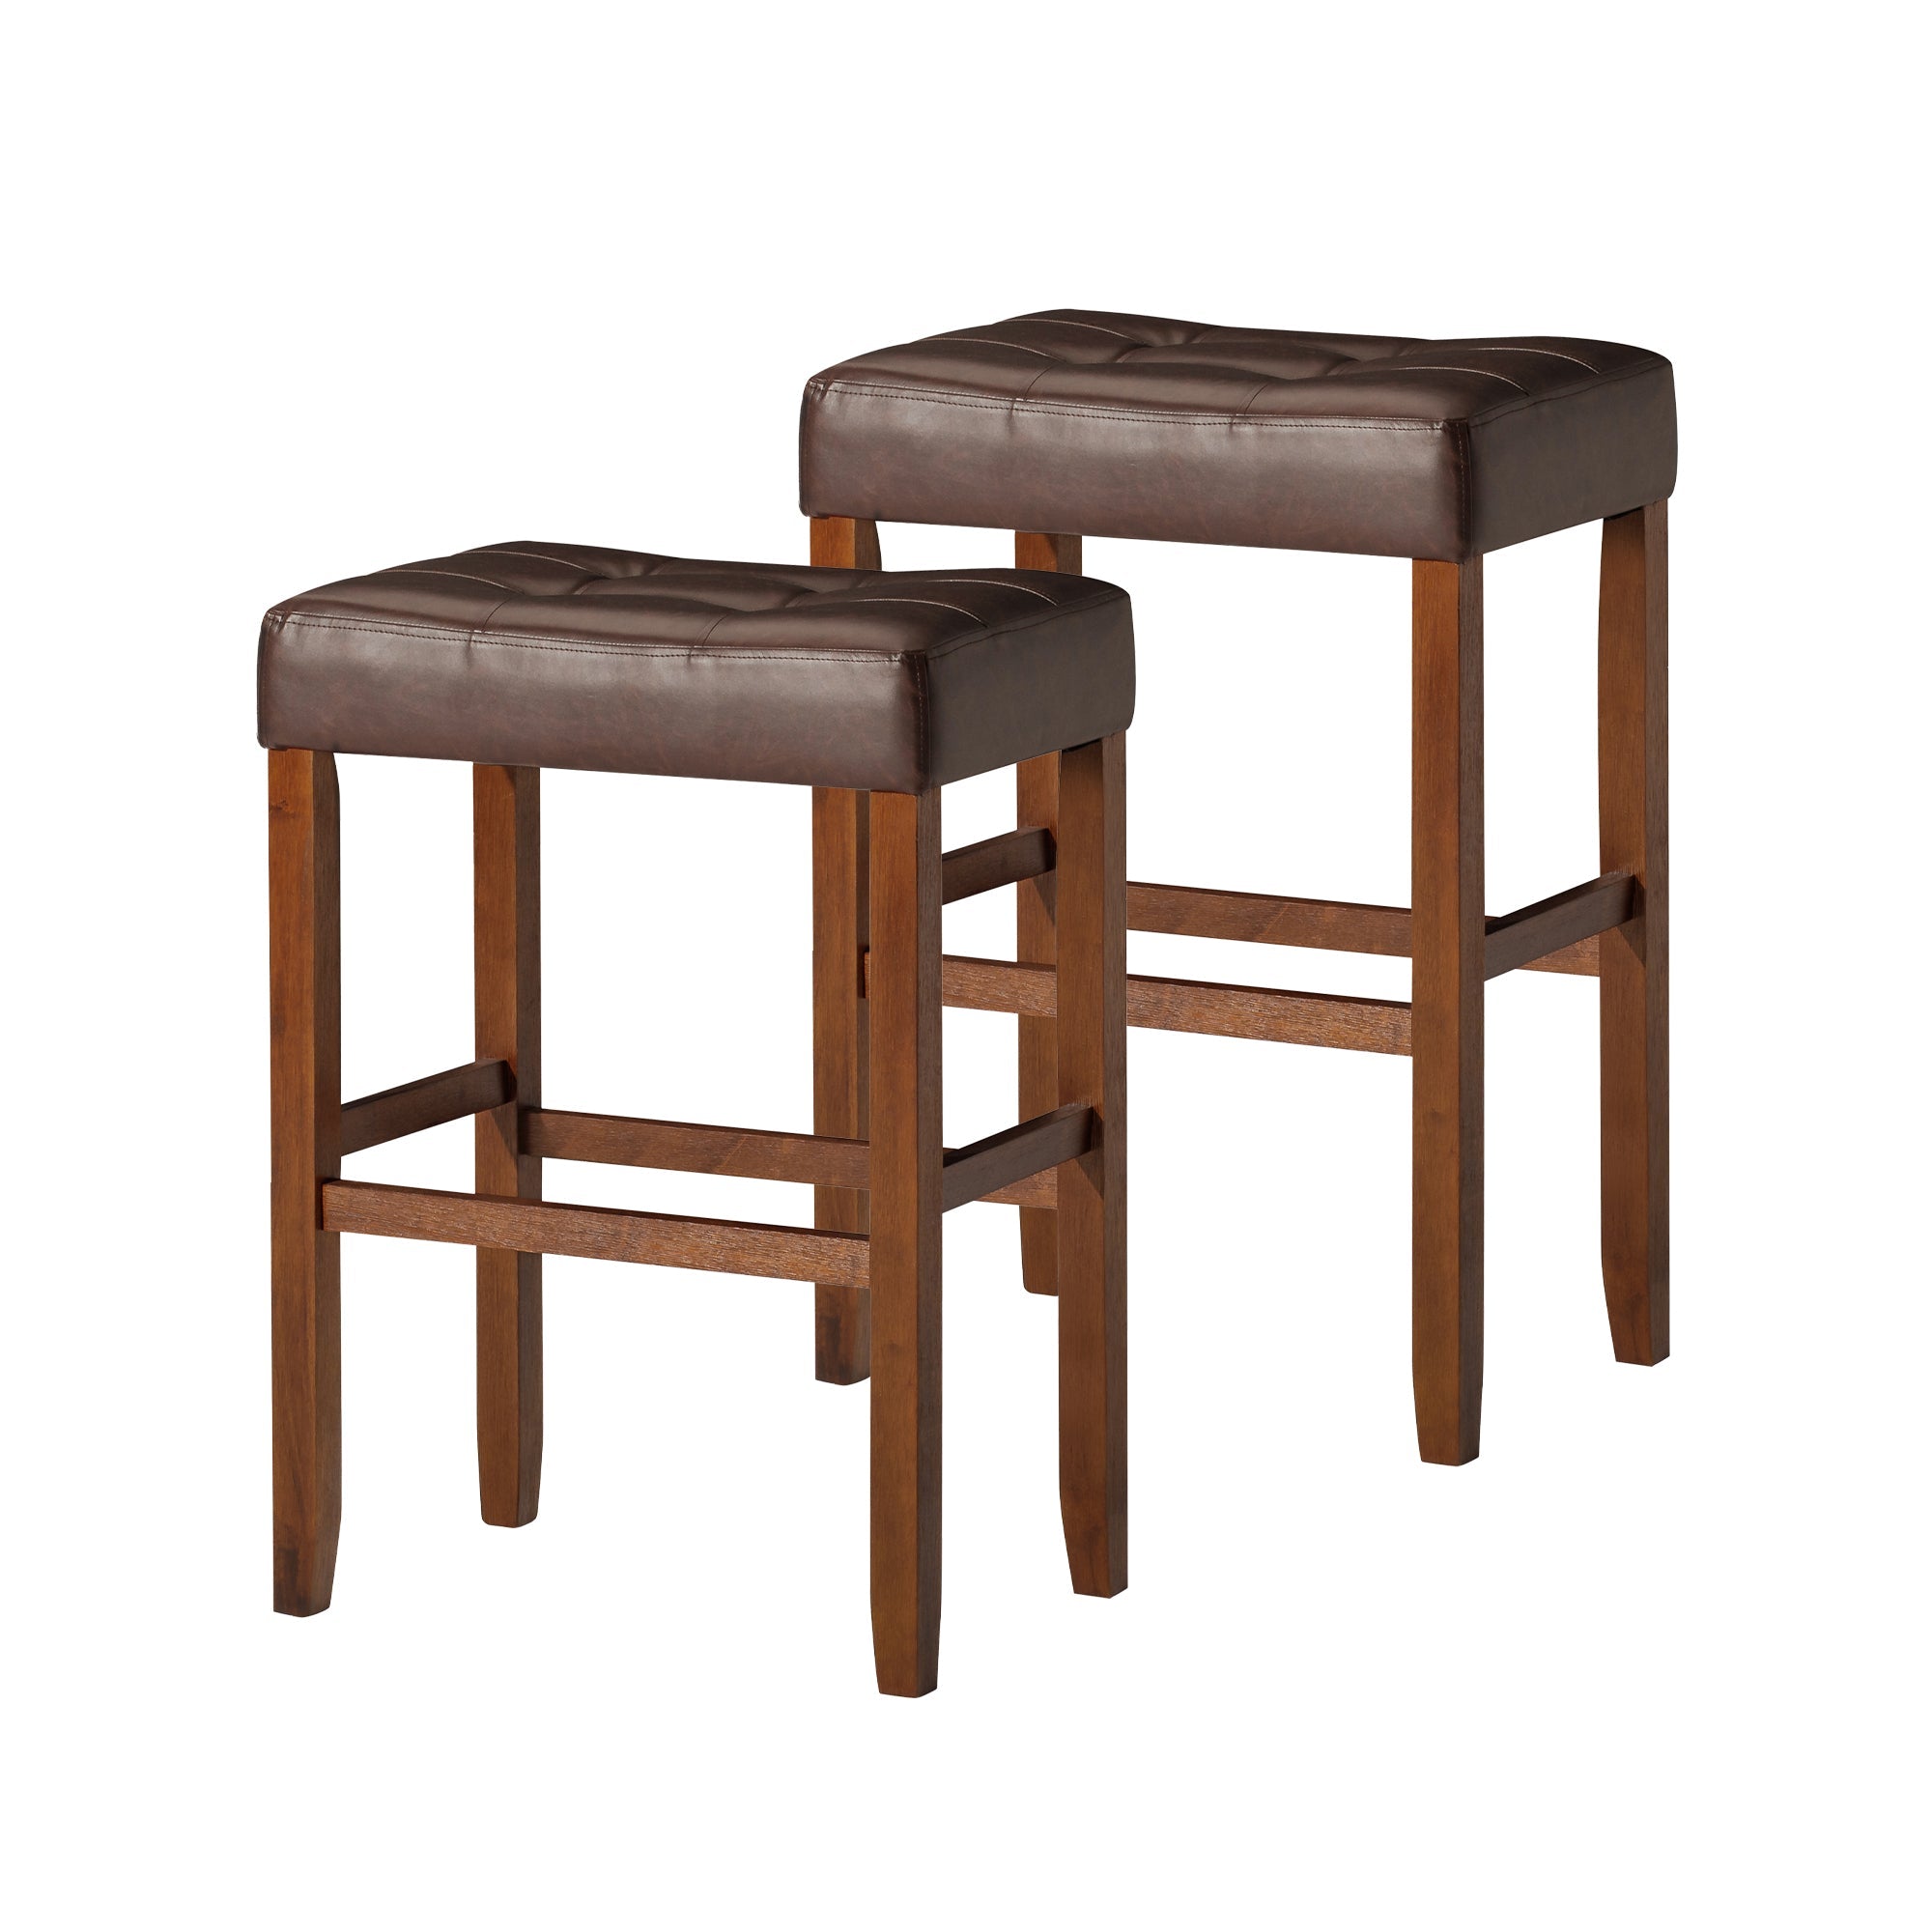 Harper Bar Stool in Walnut Wood Finish with Distressed Brown Vegan Leather, Set of 2